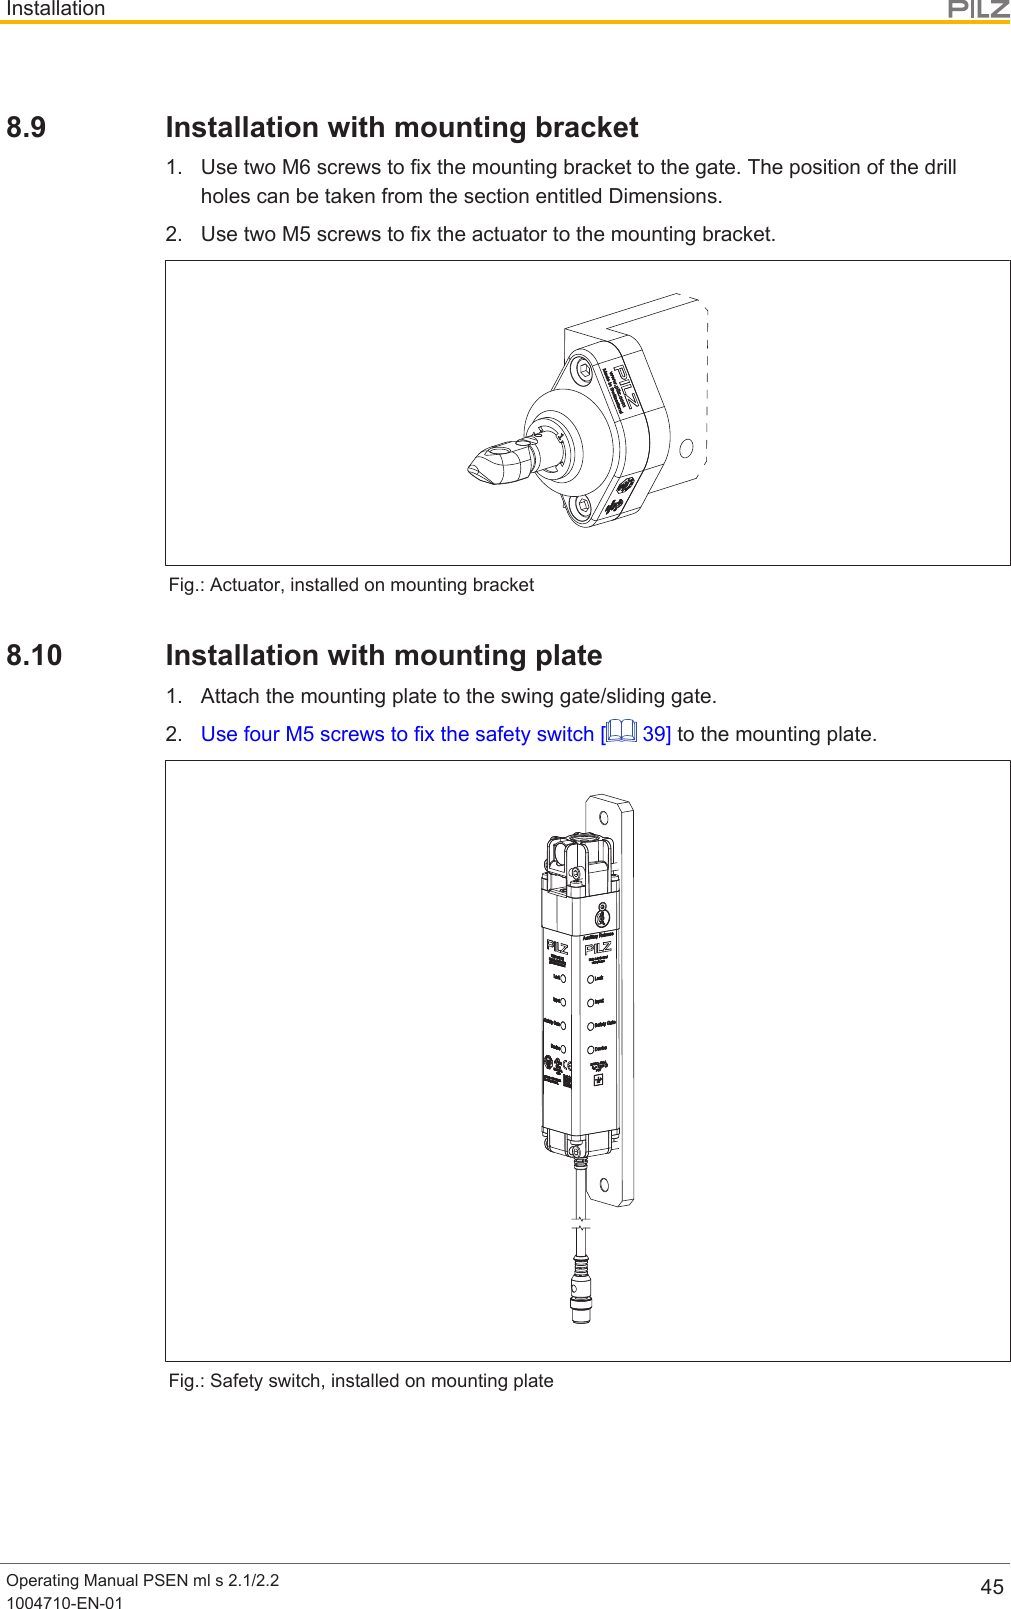 InstallationOperating Manual PSEN ml s 2.1/2.21004710-EN-01 458.9 Installation with mounting bracket1. Use two M6 screws to fix the mounting bracket to the gate. The position of the drillholes can be taken from the section entitled Dimensions.2. Use two M5 screws to fix the actuator to the mounting bracket.Fig.: Actuator, installed on mounting bracket8.10 Installation with mounting plate1. Attach the mounting plate to the swing gate/sliding gate.2. Use four M5 screws to fix the safety switch [  39] to the mounting plate.Fig.: Safety switch, installed on mounting plate